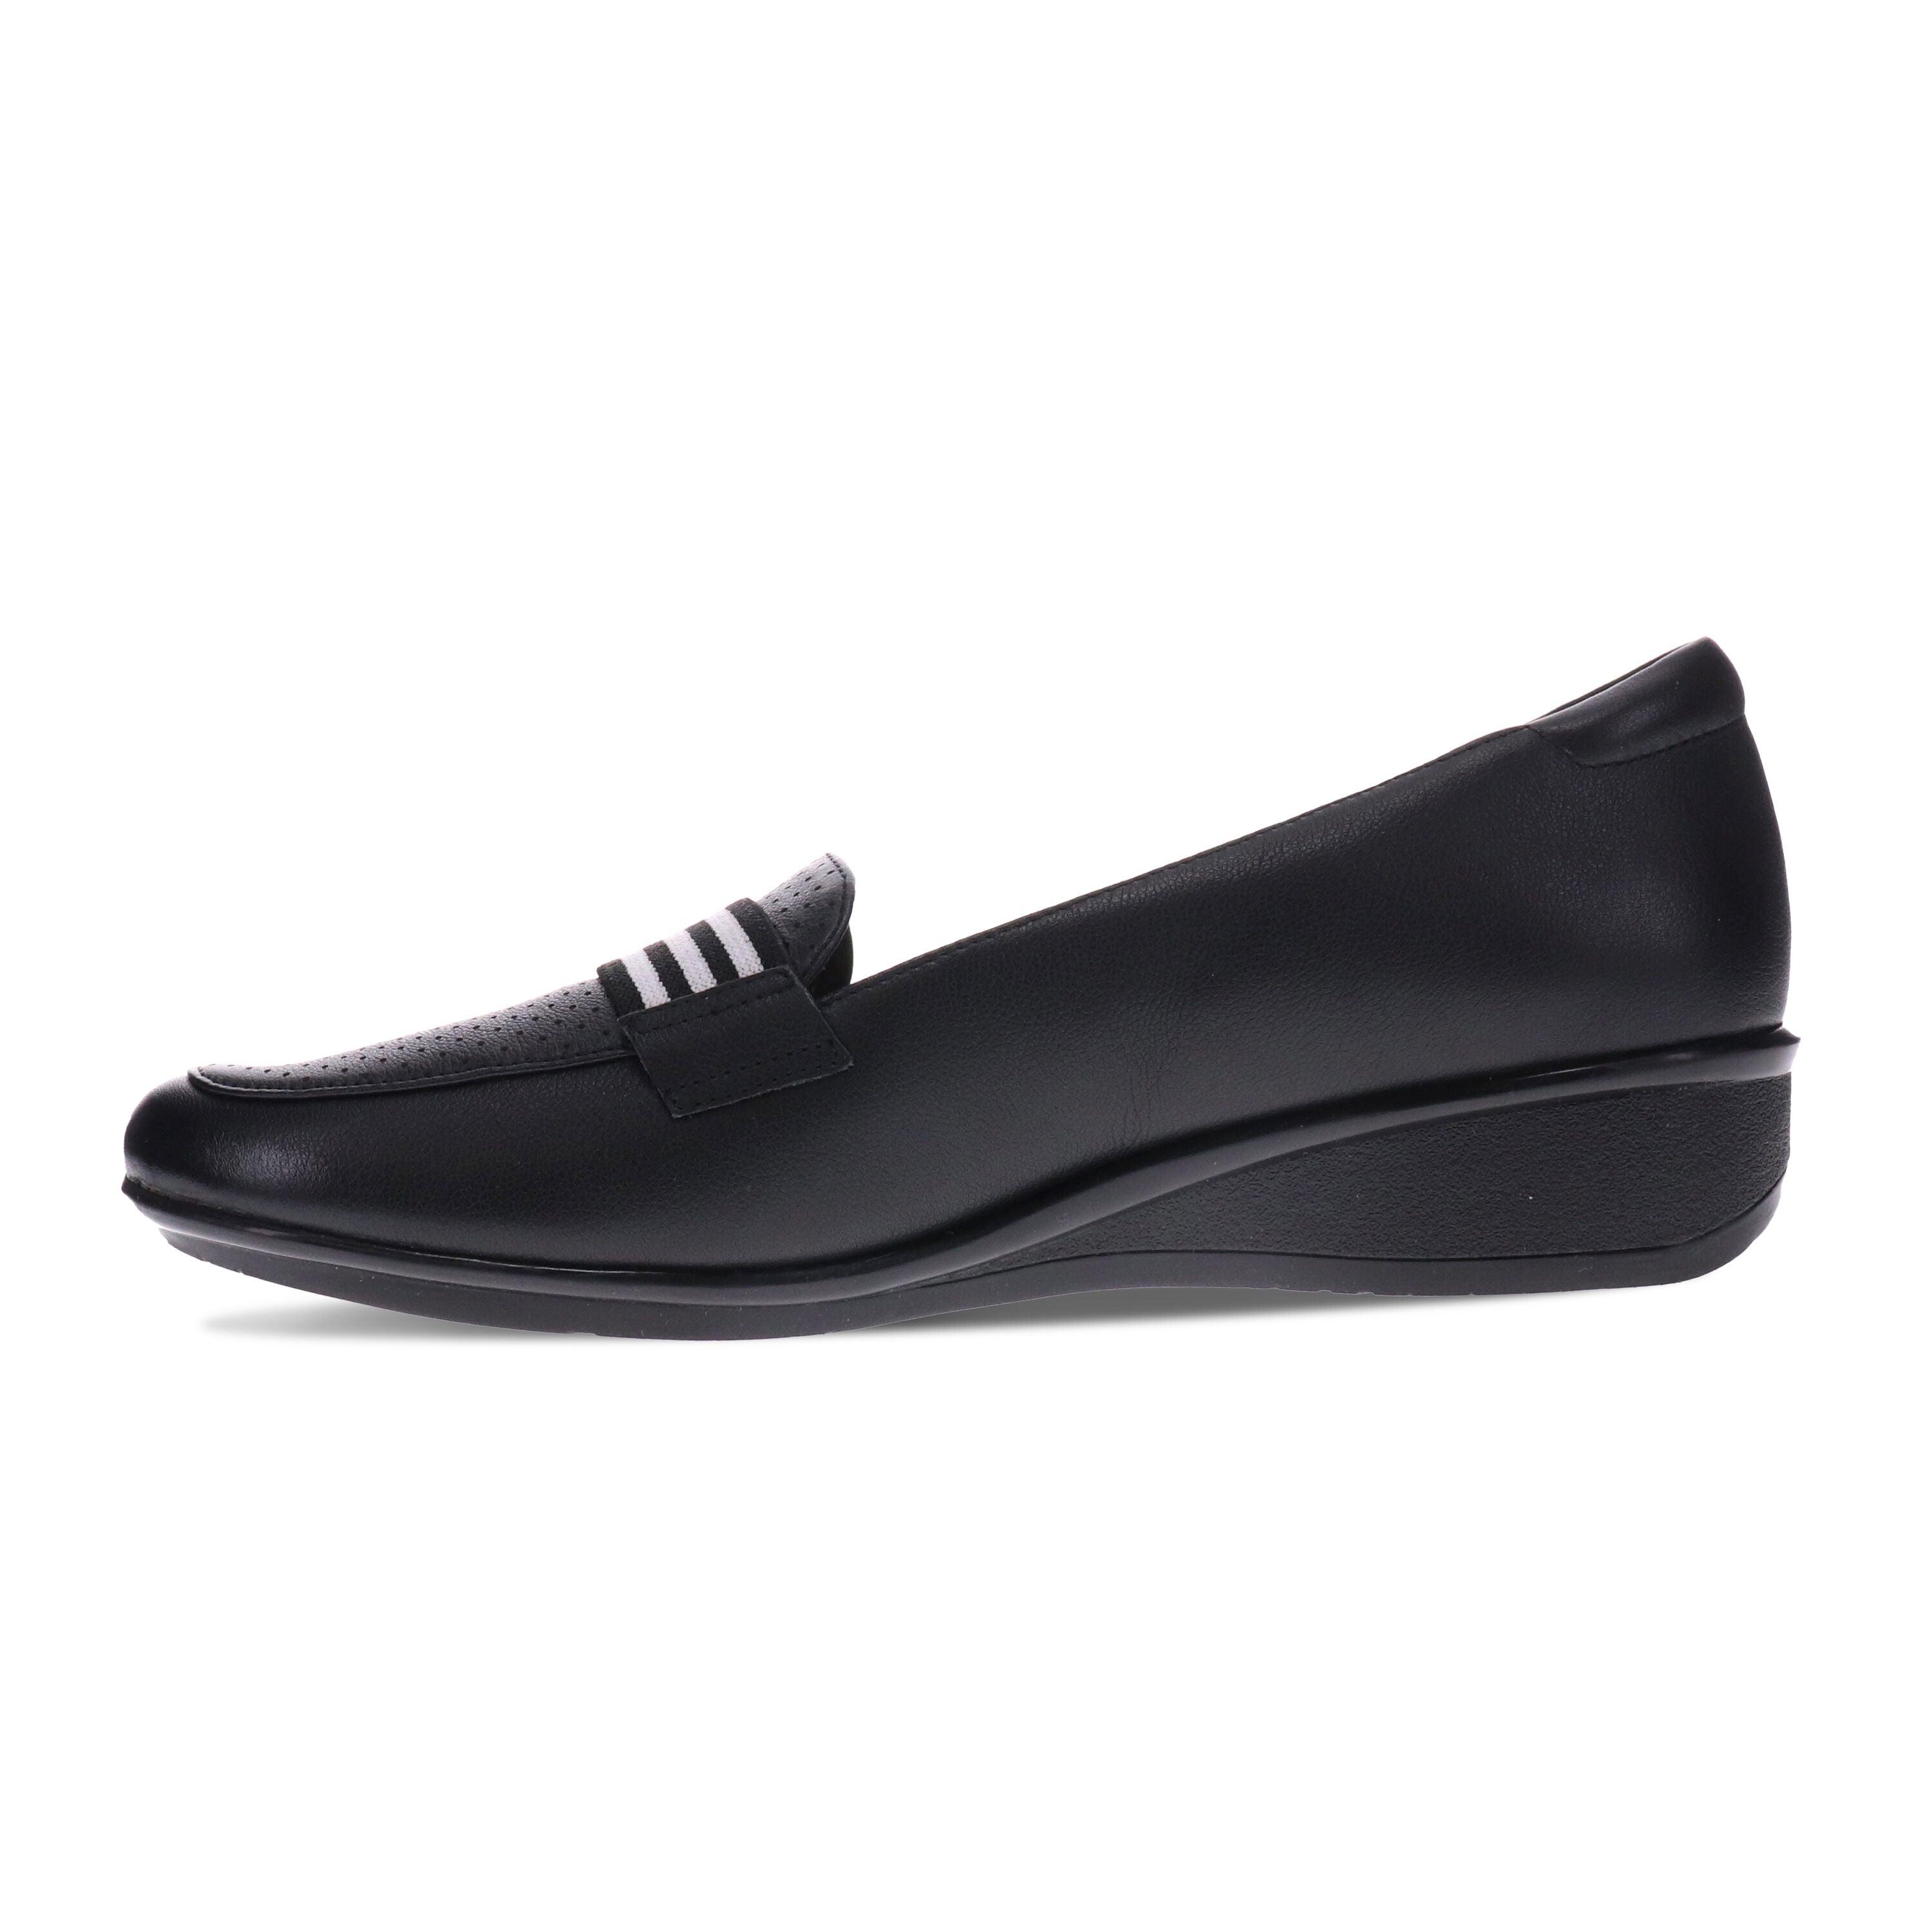 Monte Carlo Wedge Loafer - Revere Shoes